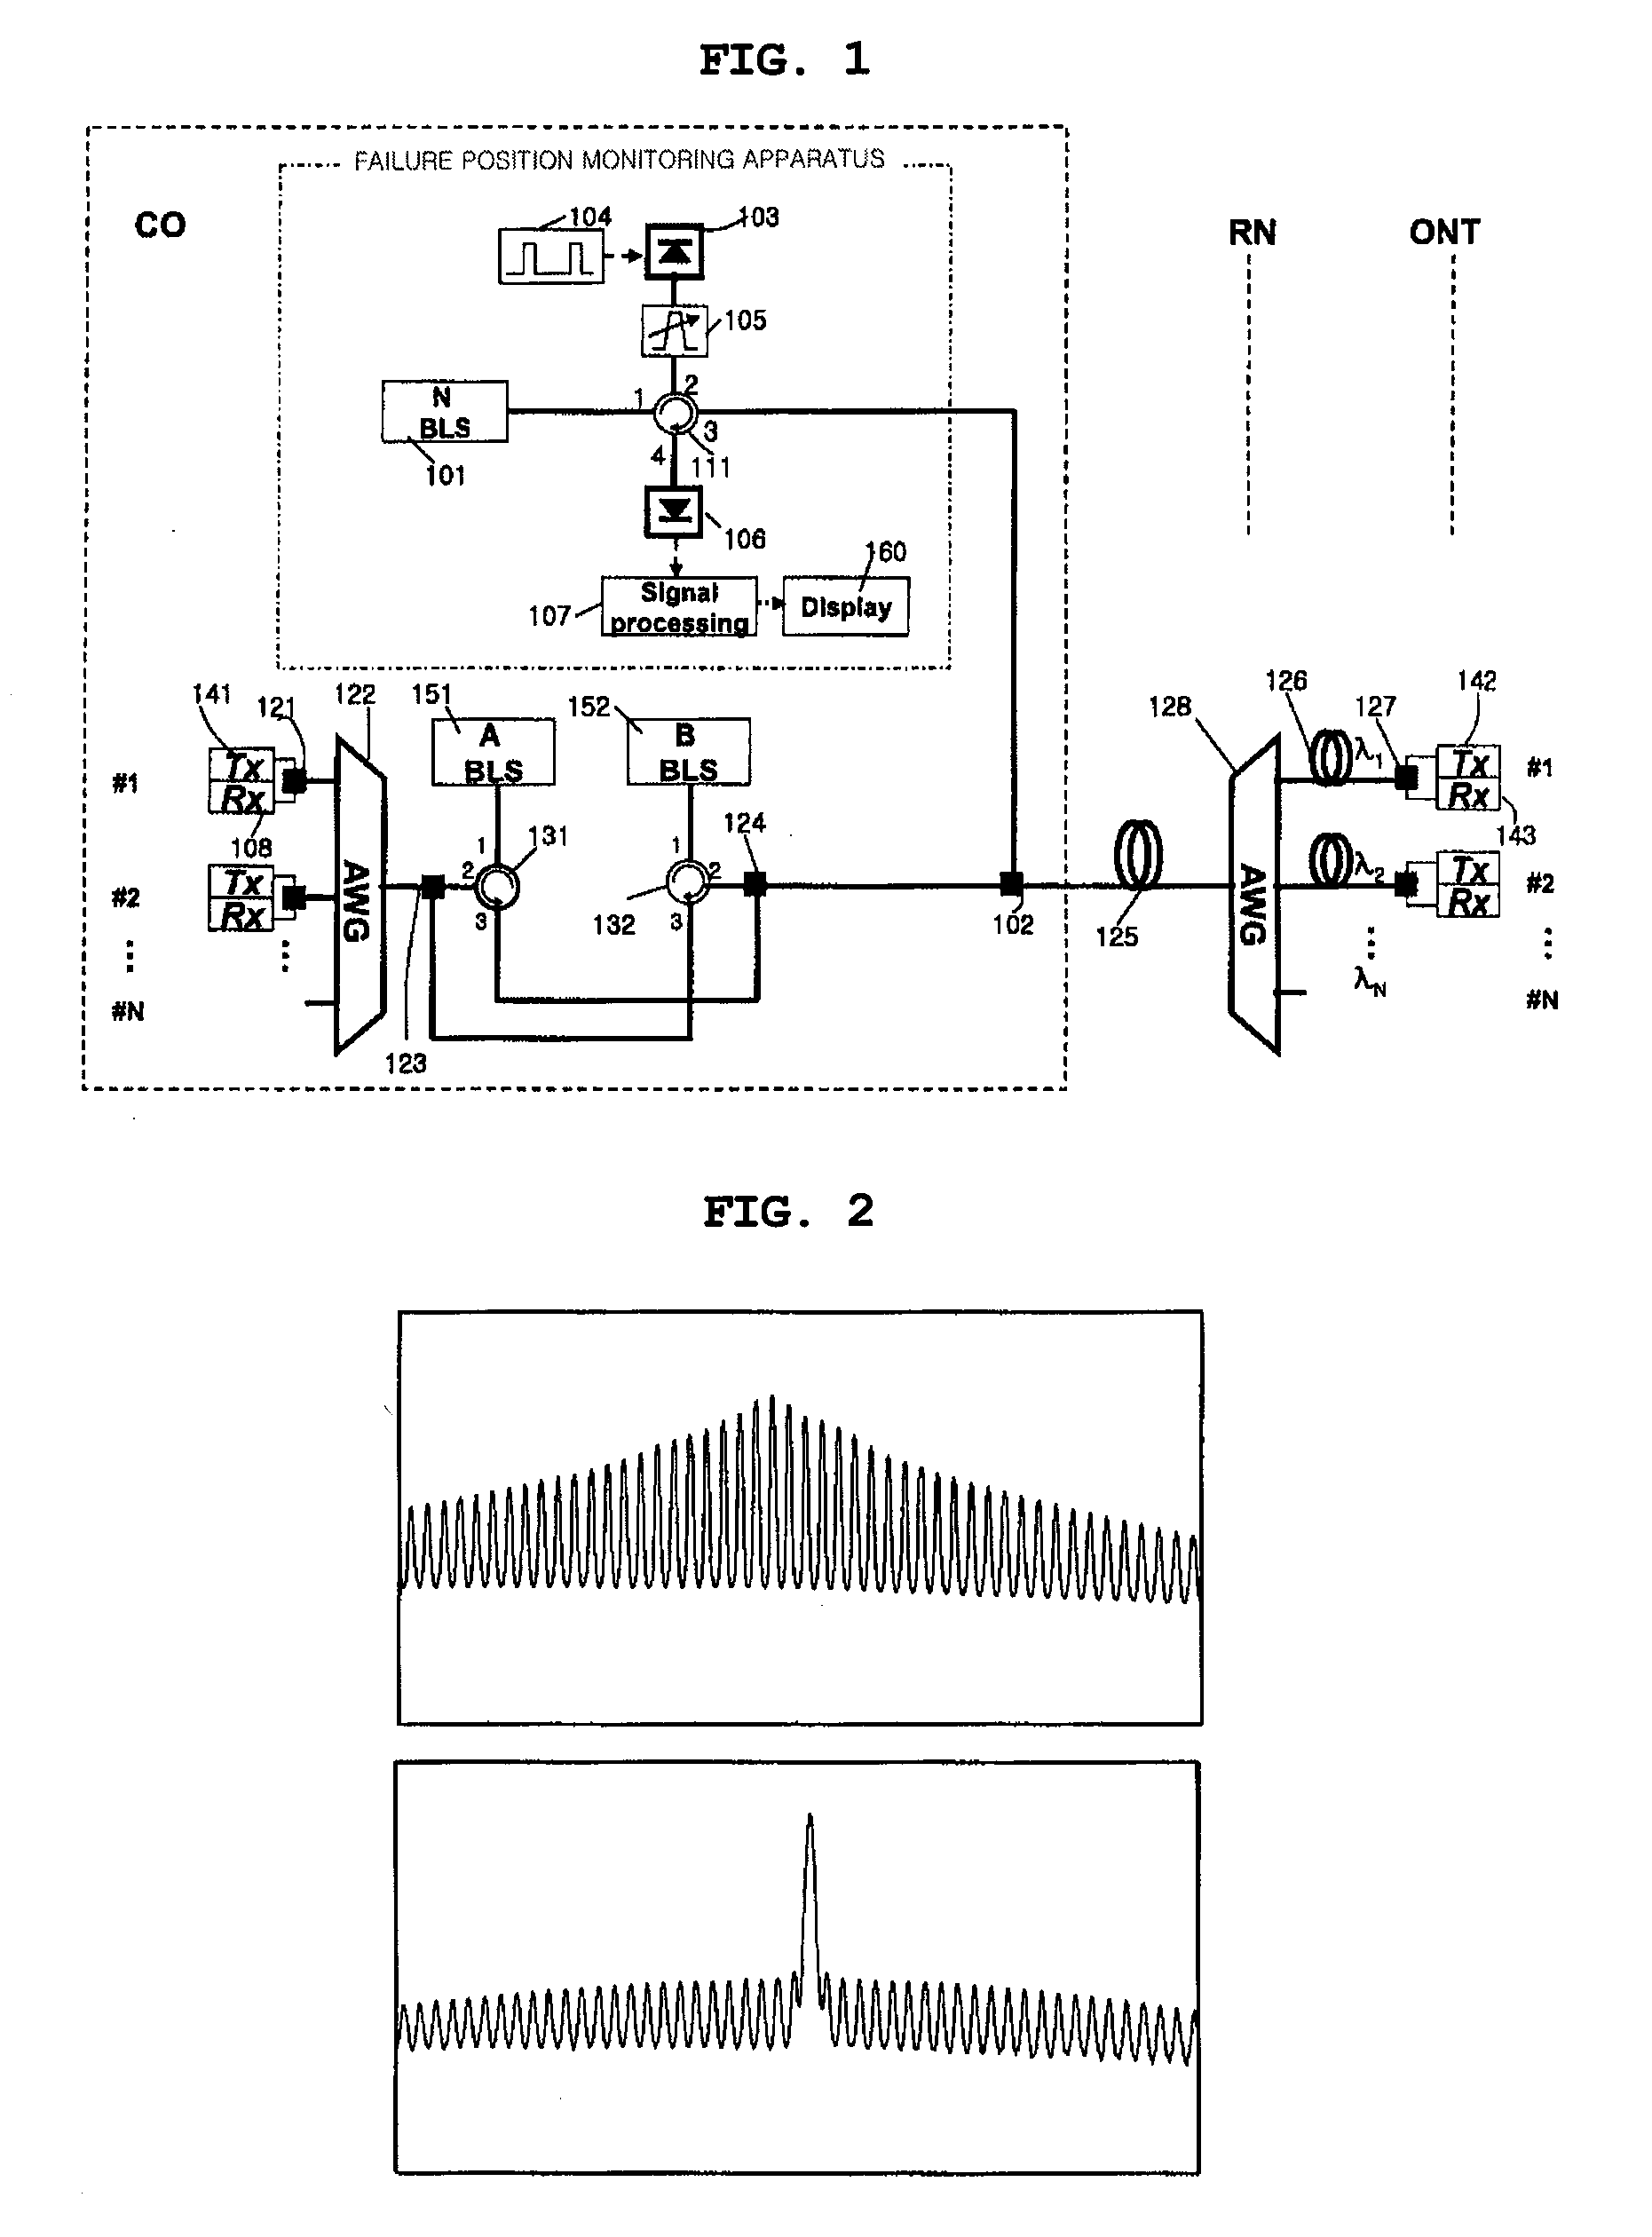 Apparatus for Monitoring Failure Positions in Wavelength Division Multiplexing-Passive Optical Networks and Wavelength Division Multiplexing-Passive Optical Network Systems Having the Apparatus